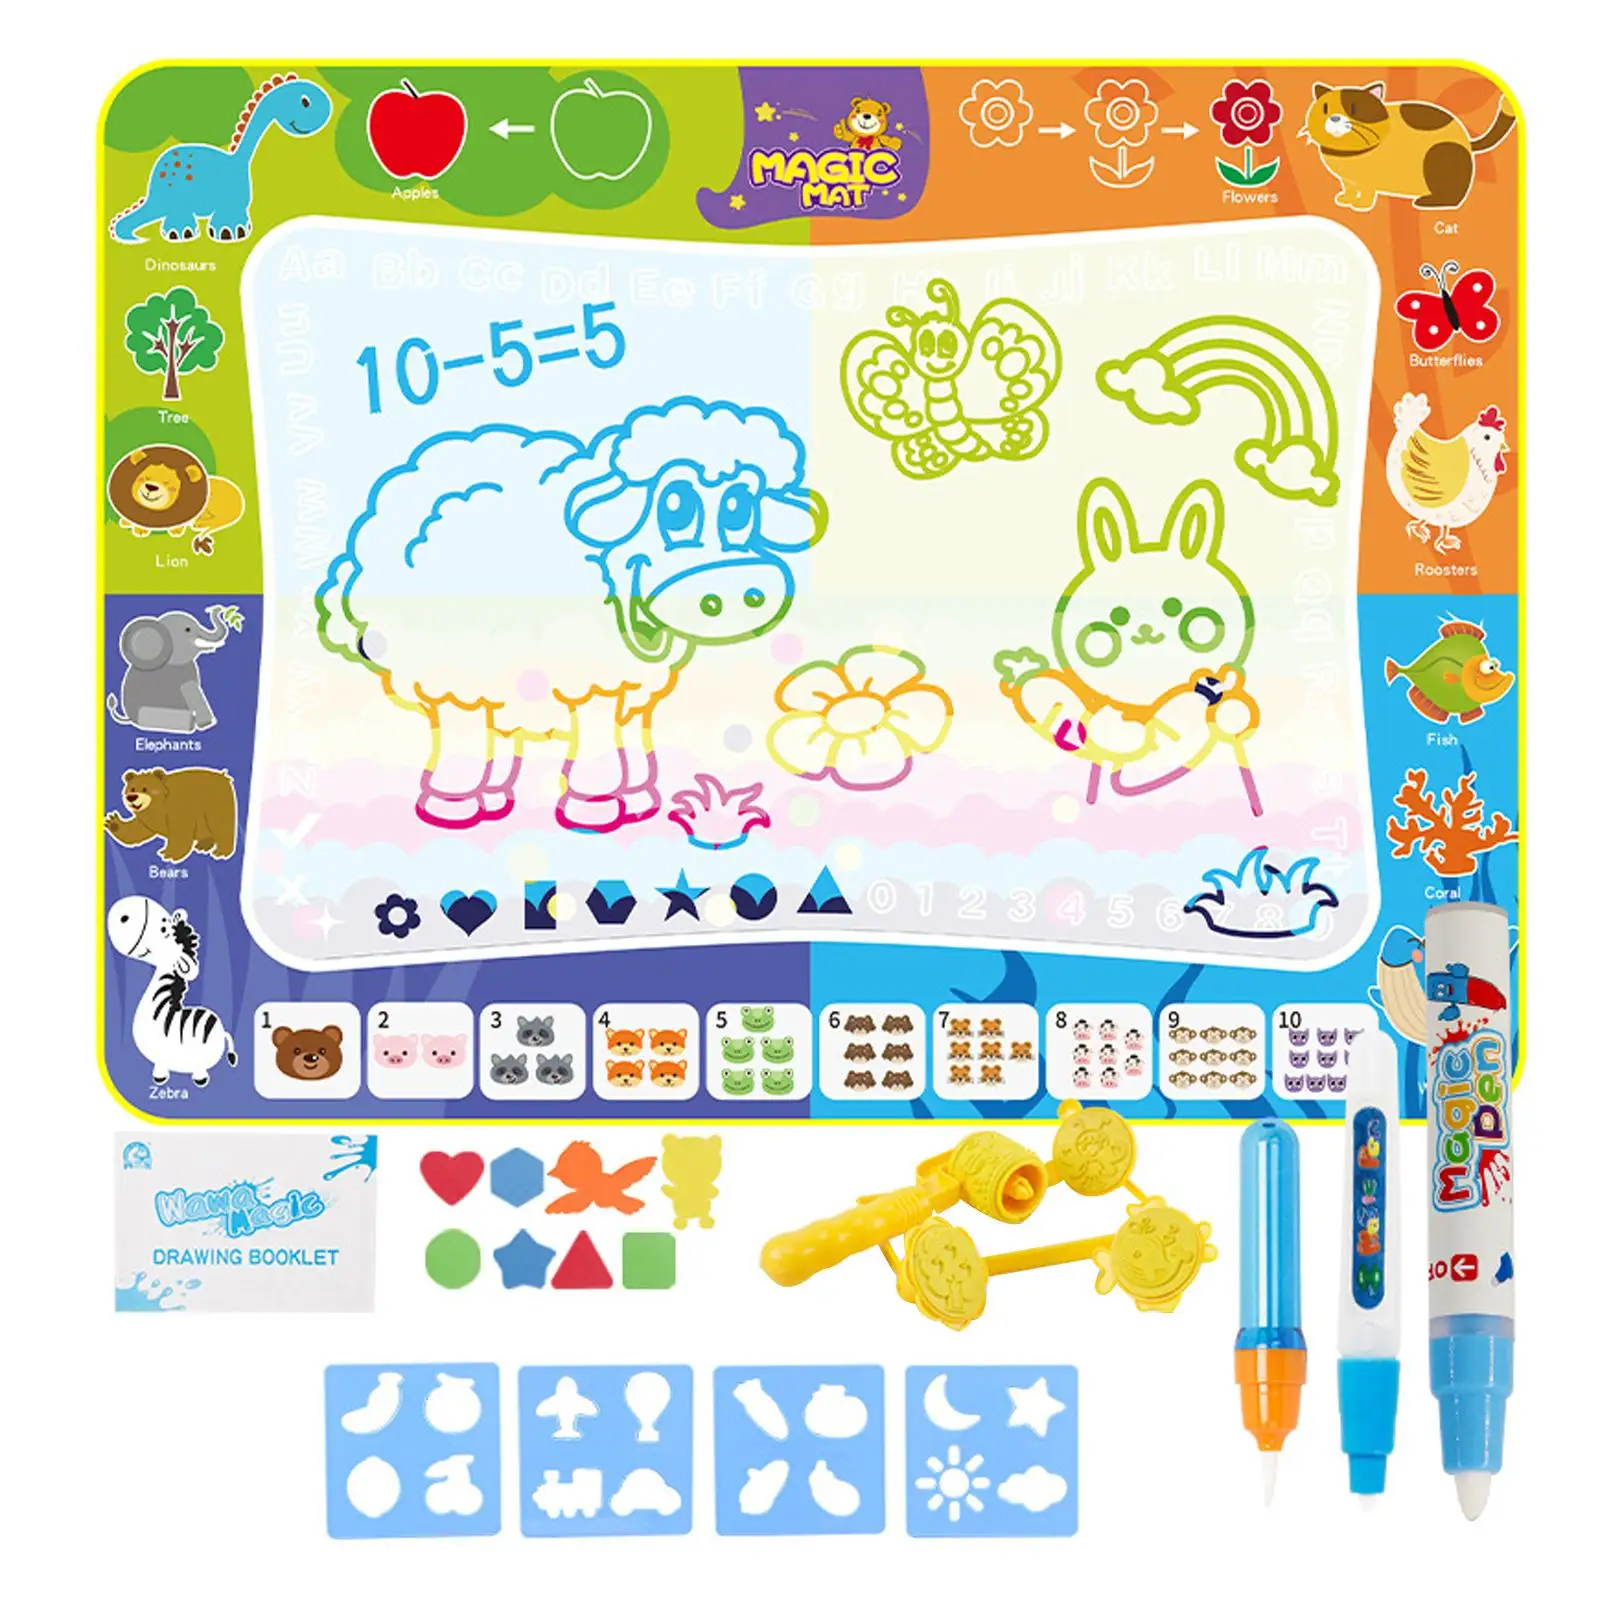 Water Doodle Mat, Water Drawing Mat, Activity Mat Writing Doodle Board for Kids Girls Boys Birthday Gifts